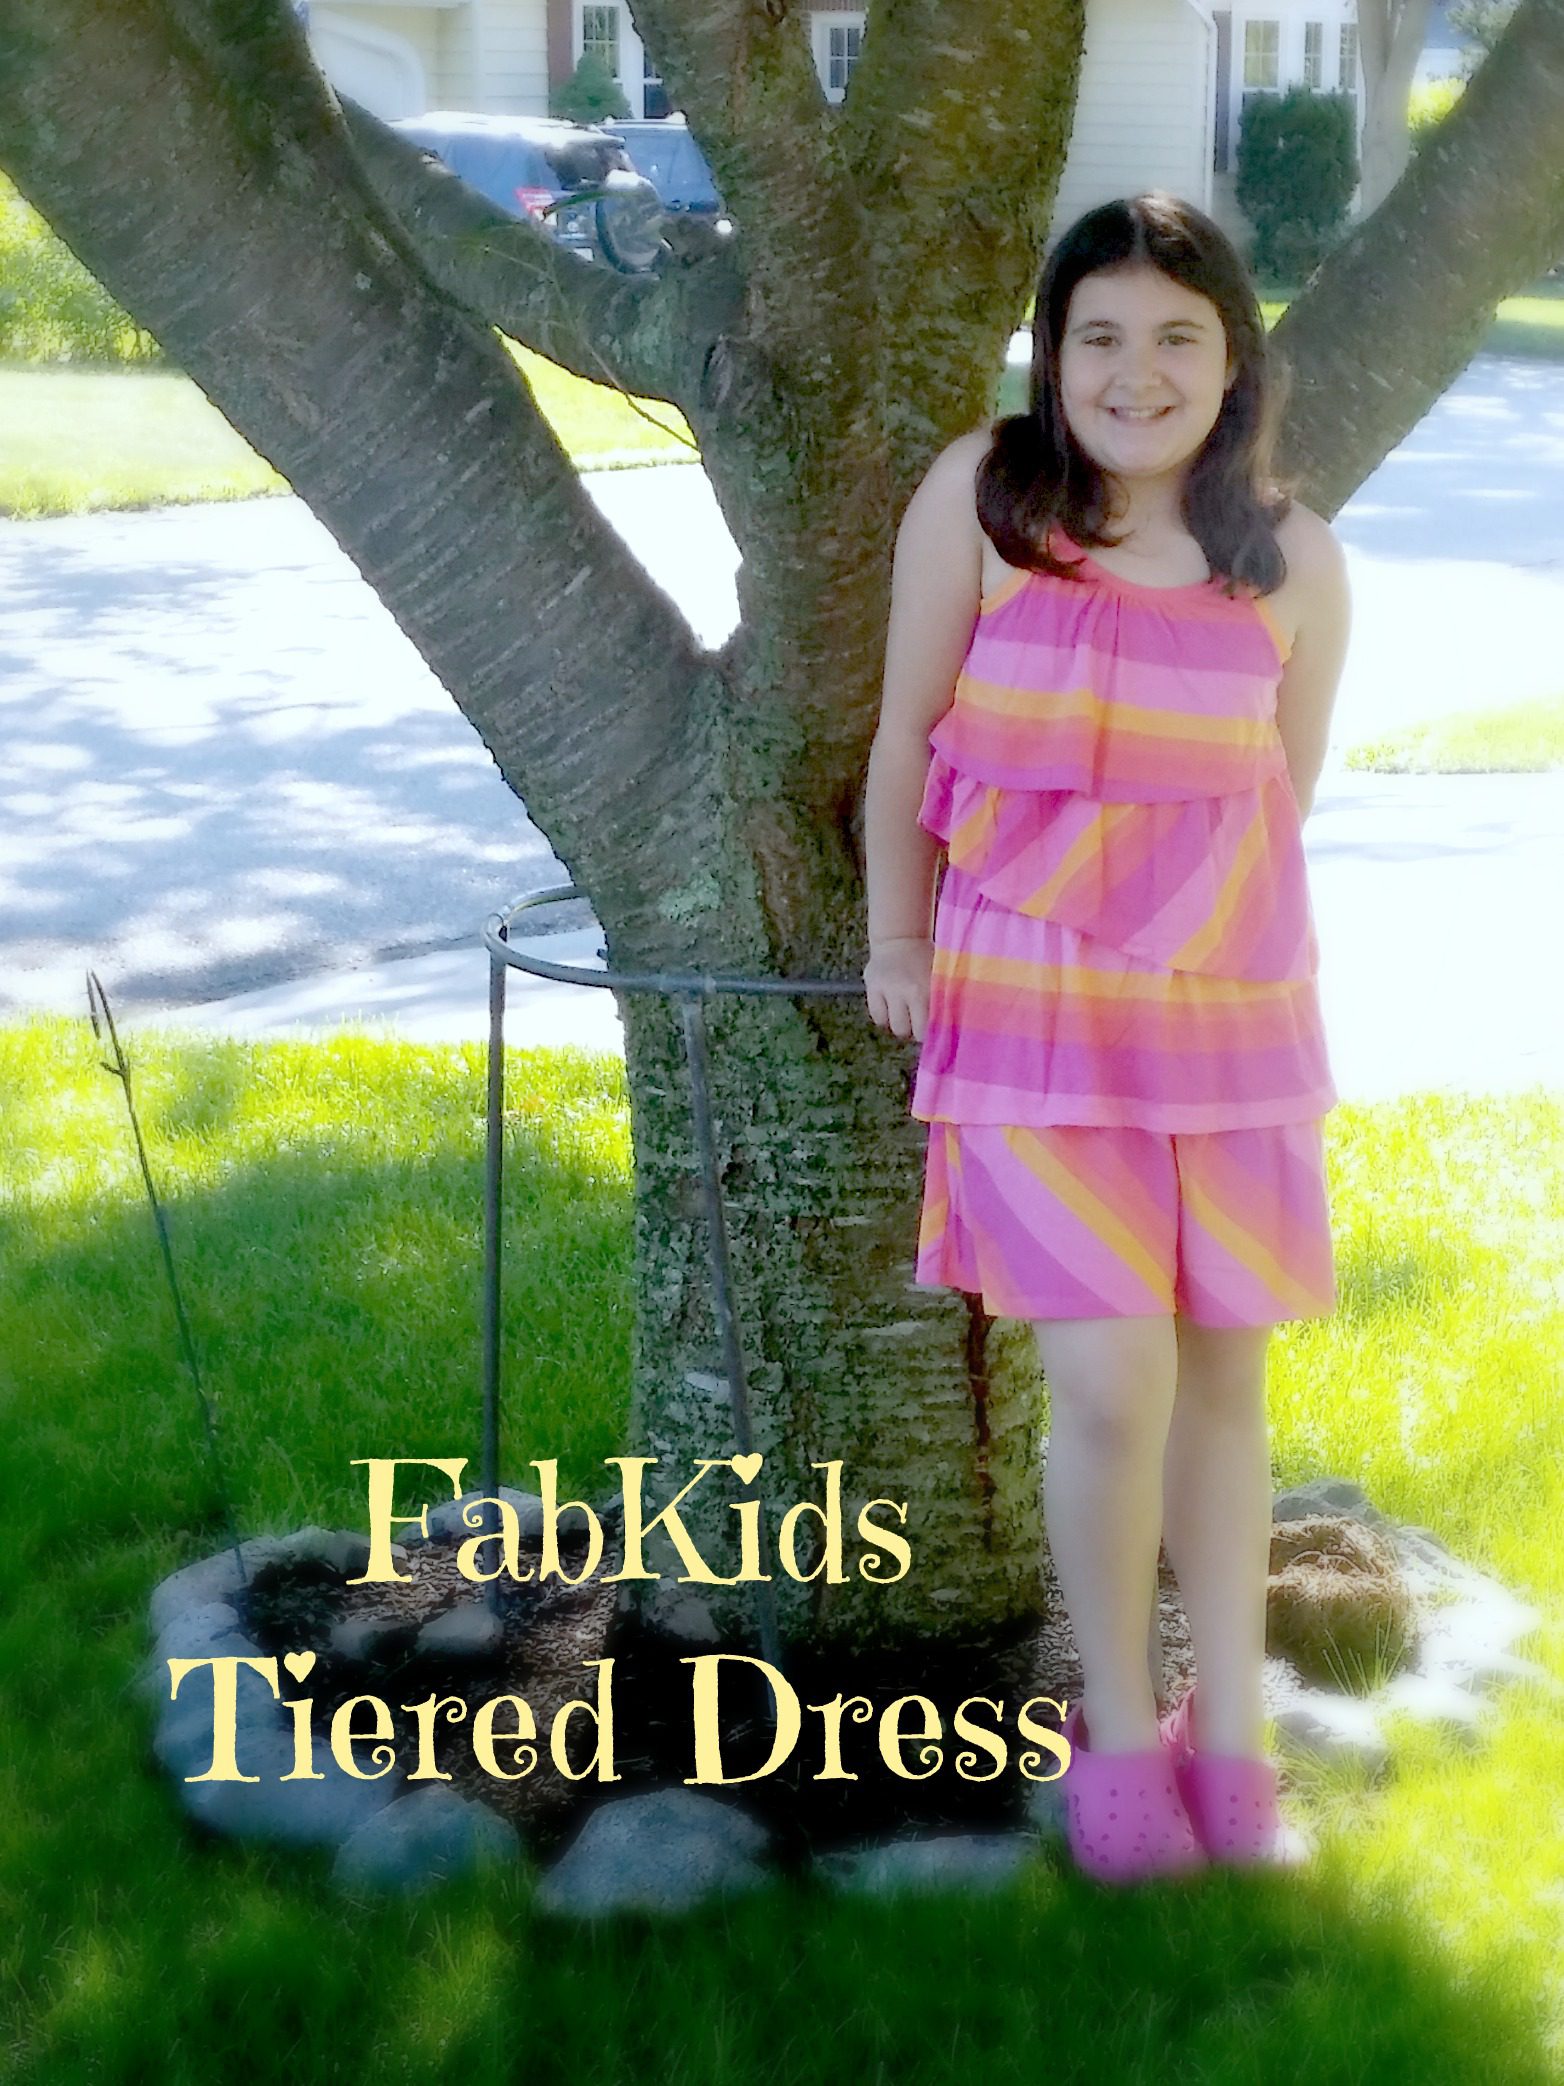 Check out FabKids Tiered Dress #MyFabKid